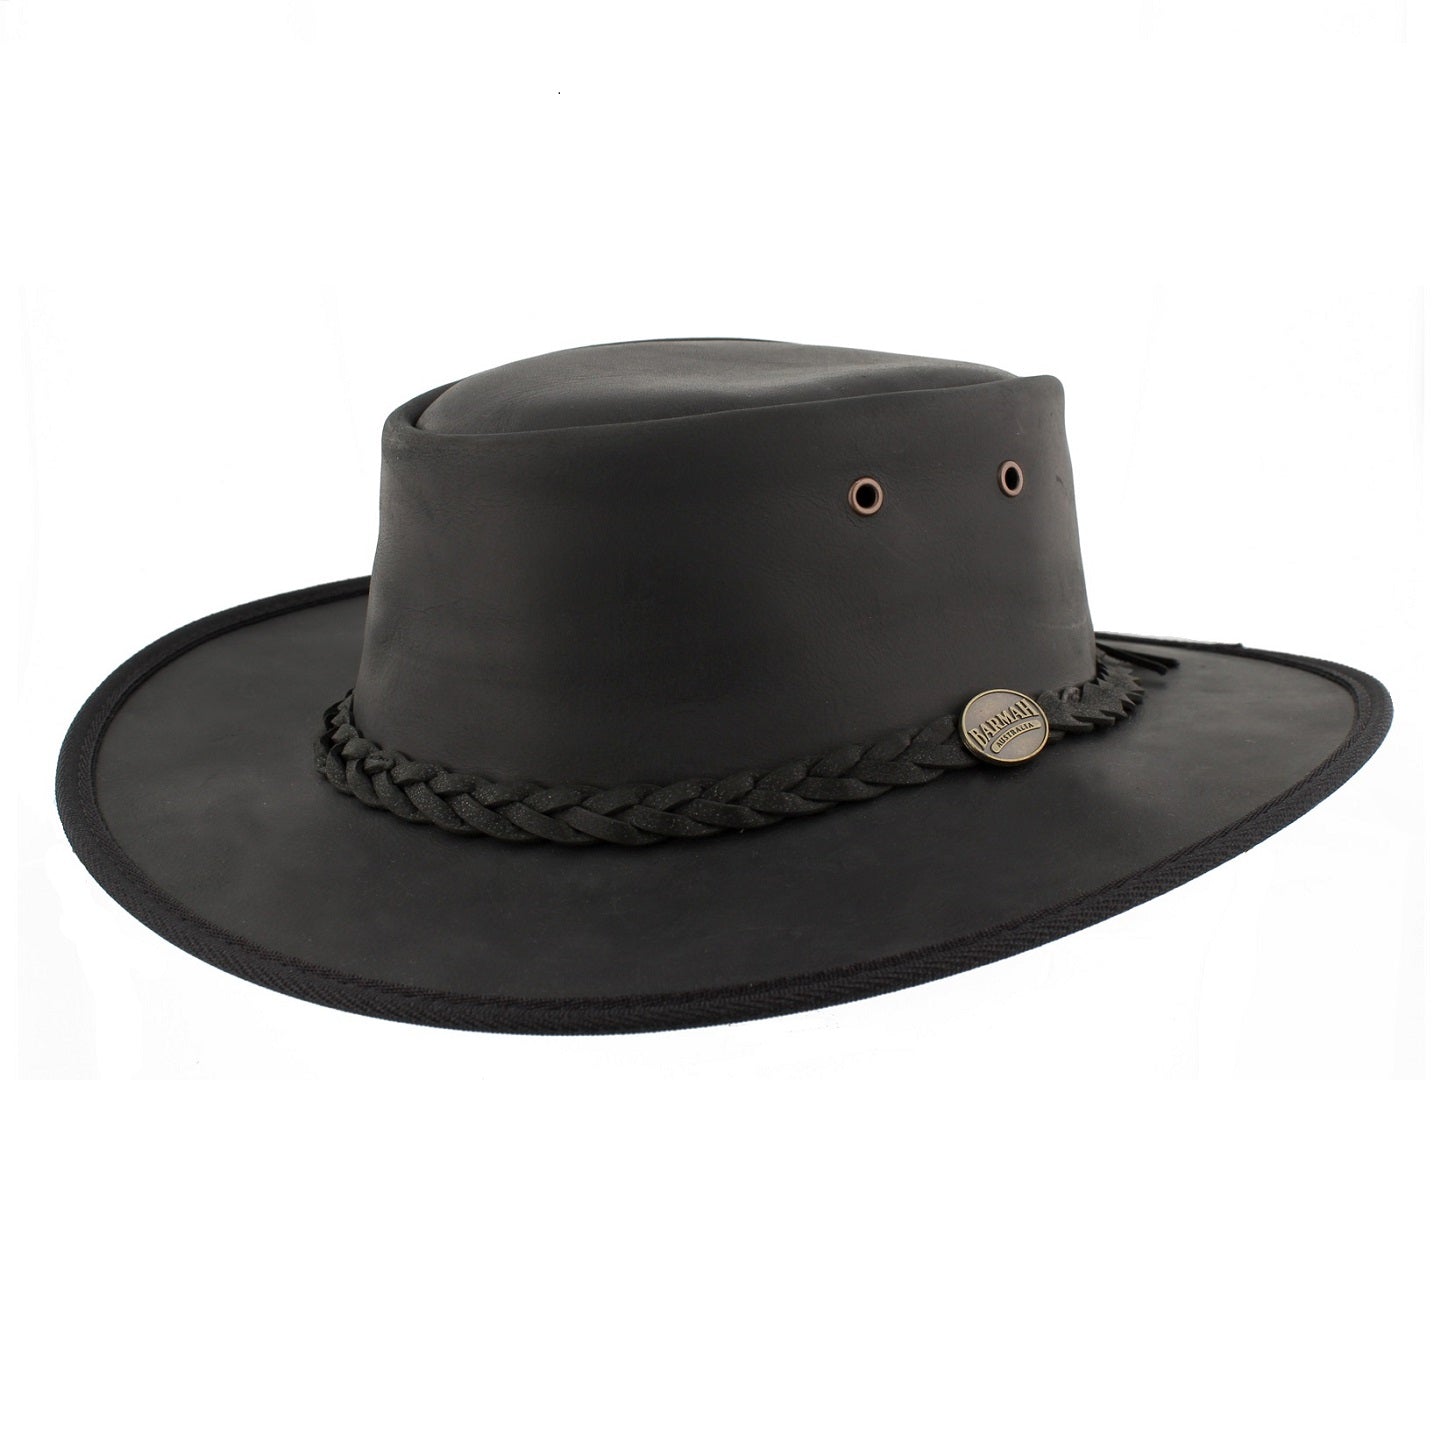 Barmah Foldaway Aussie Bronco Leather Hat 1060 In Black – The Hat Company